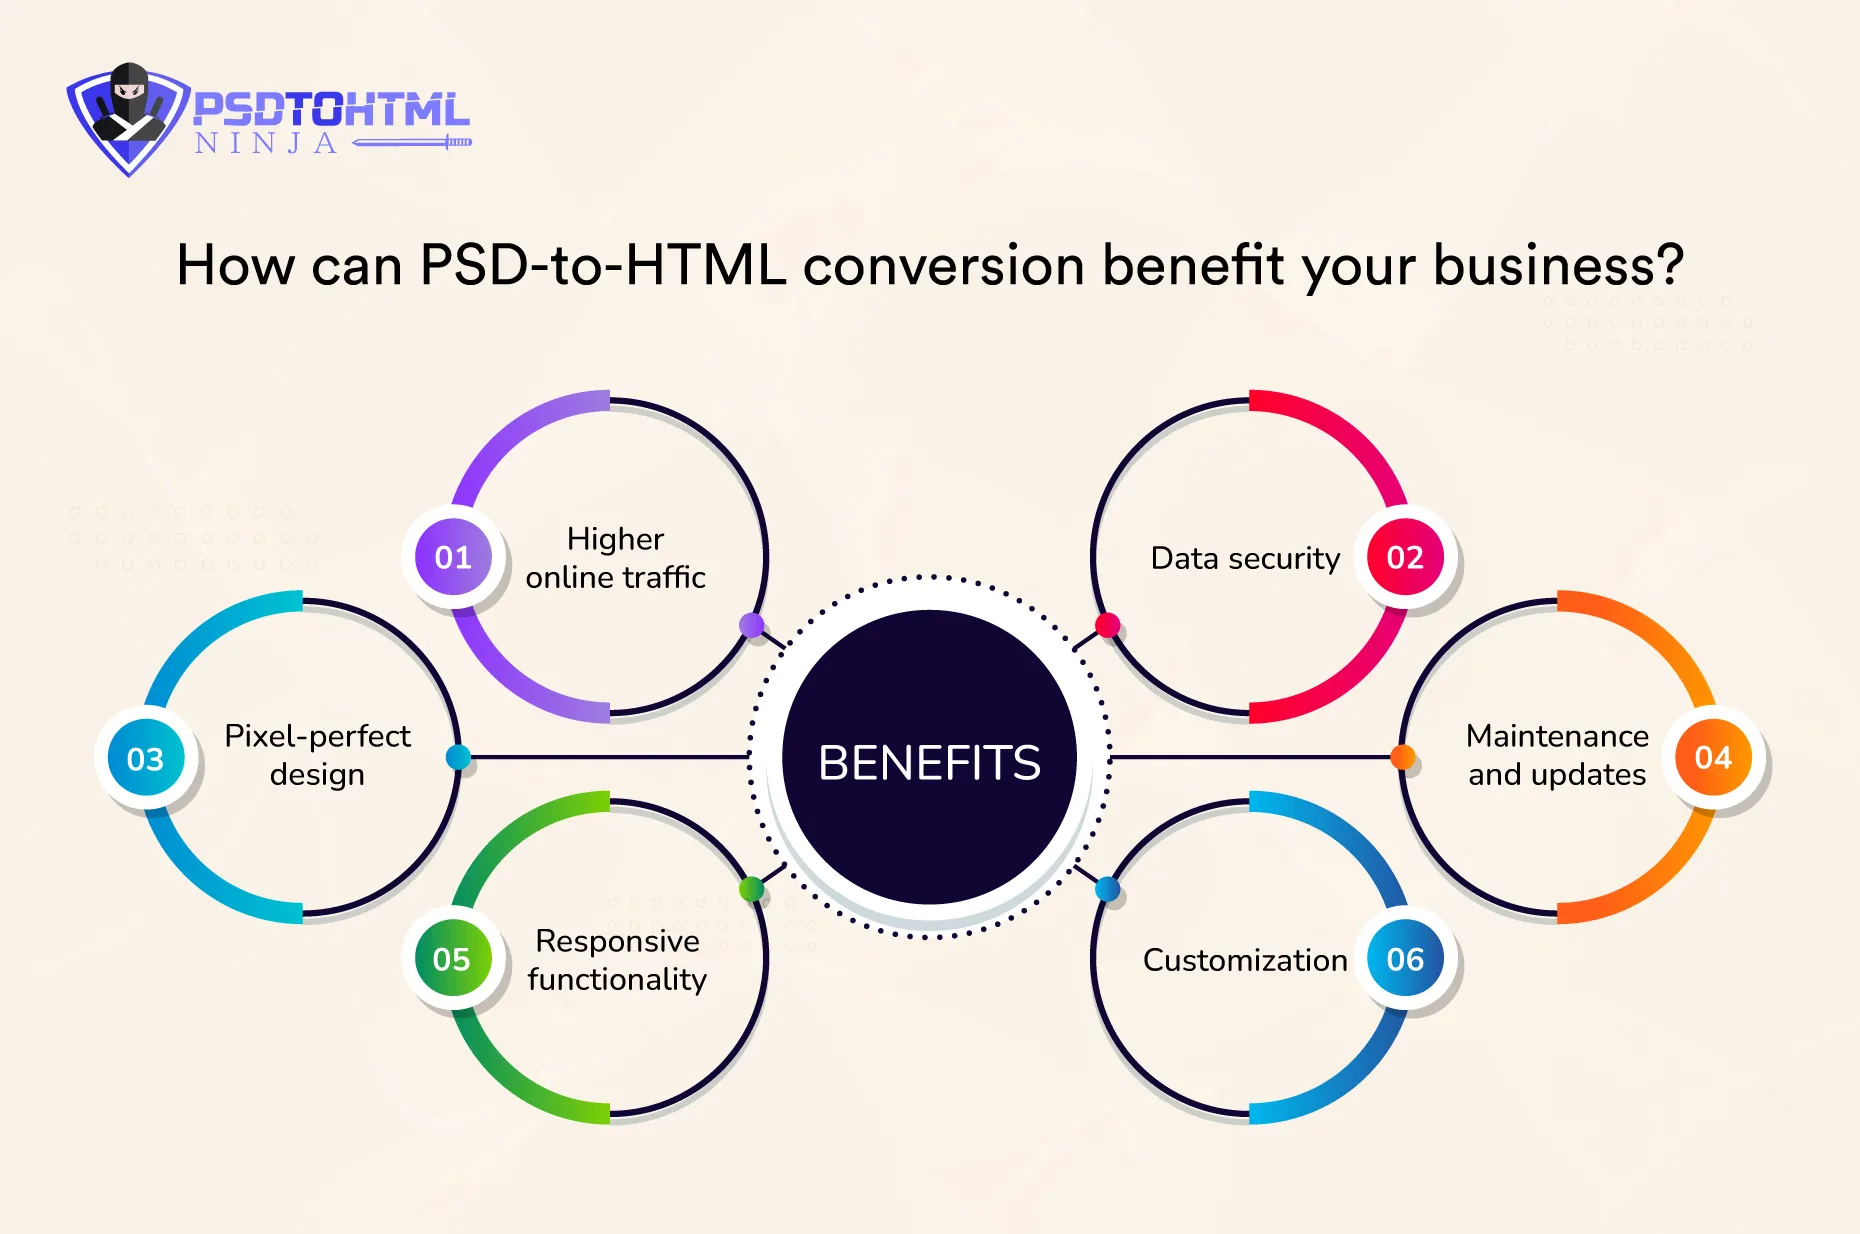 How can PSD-to-HTML conversion benefit your business?